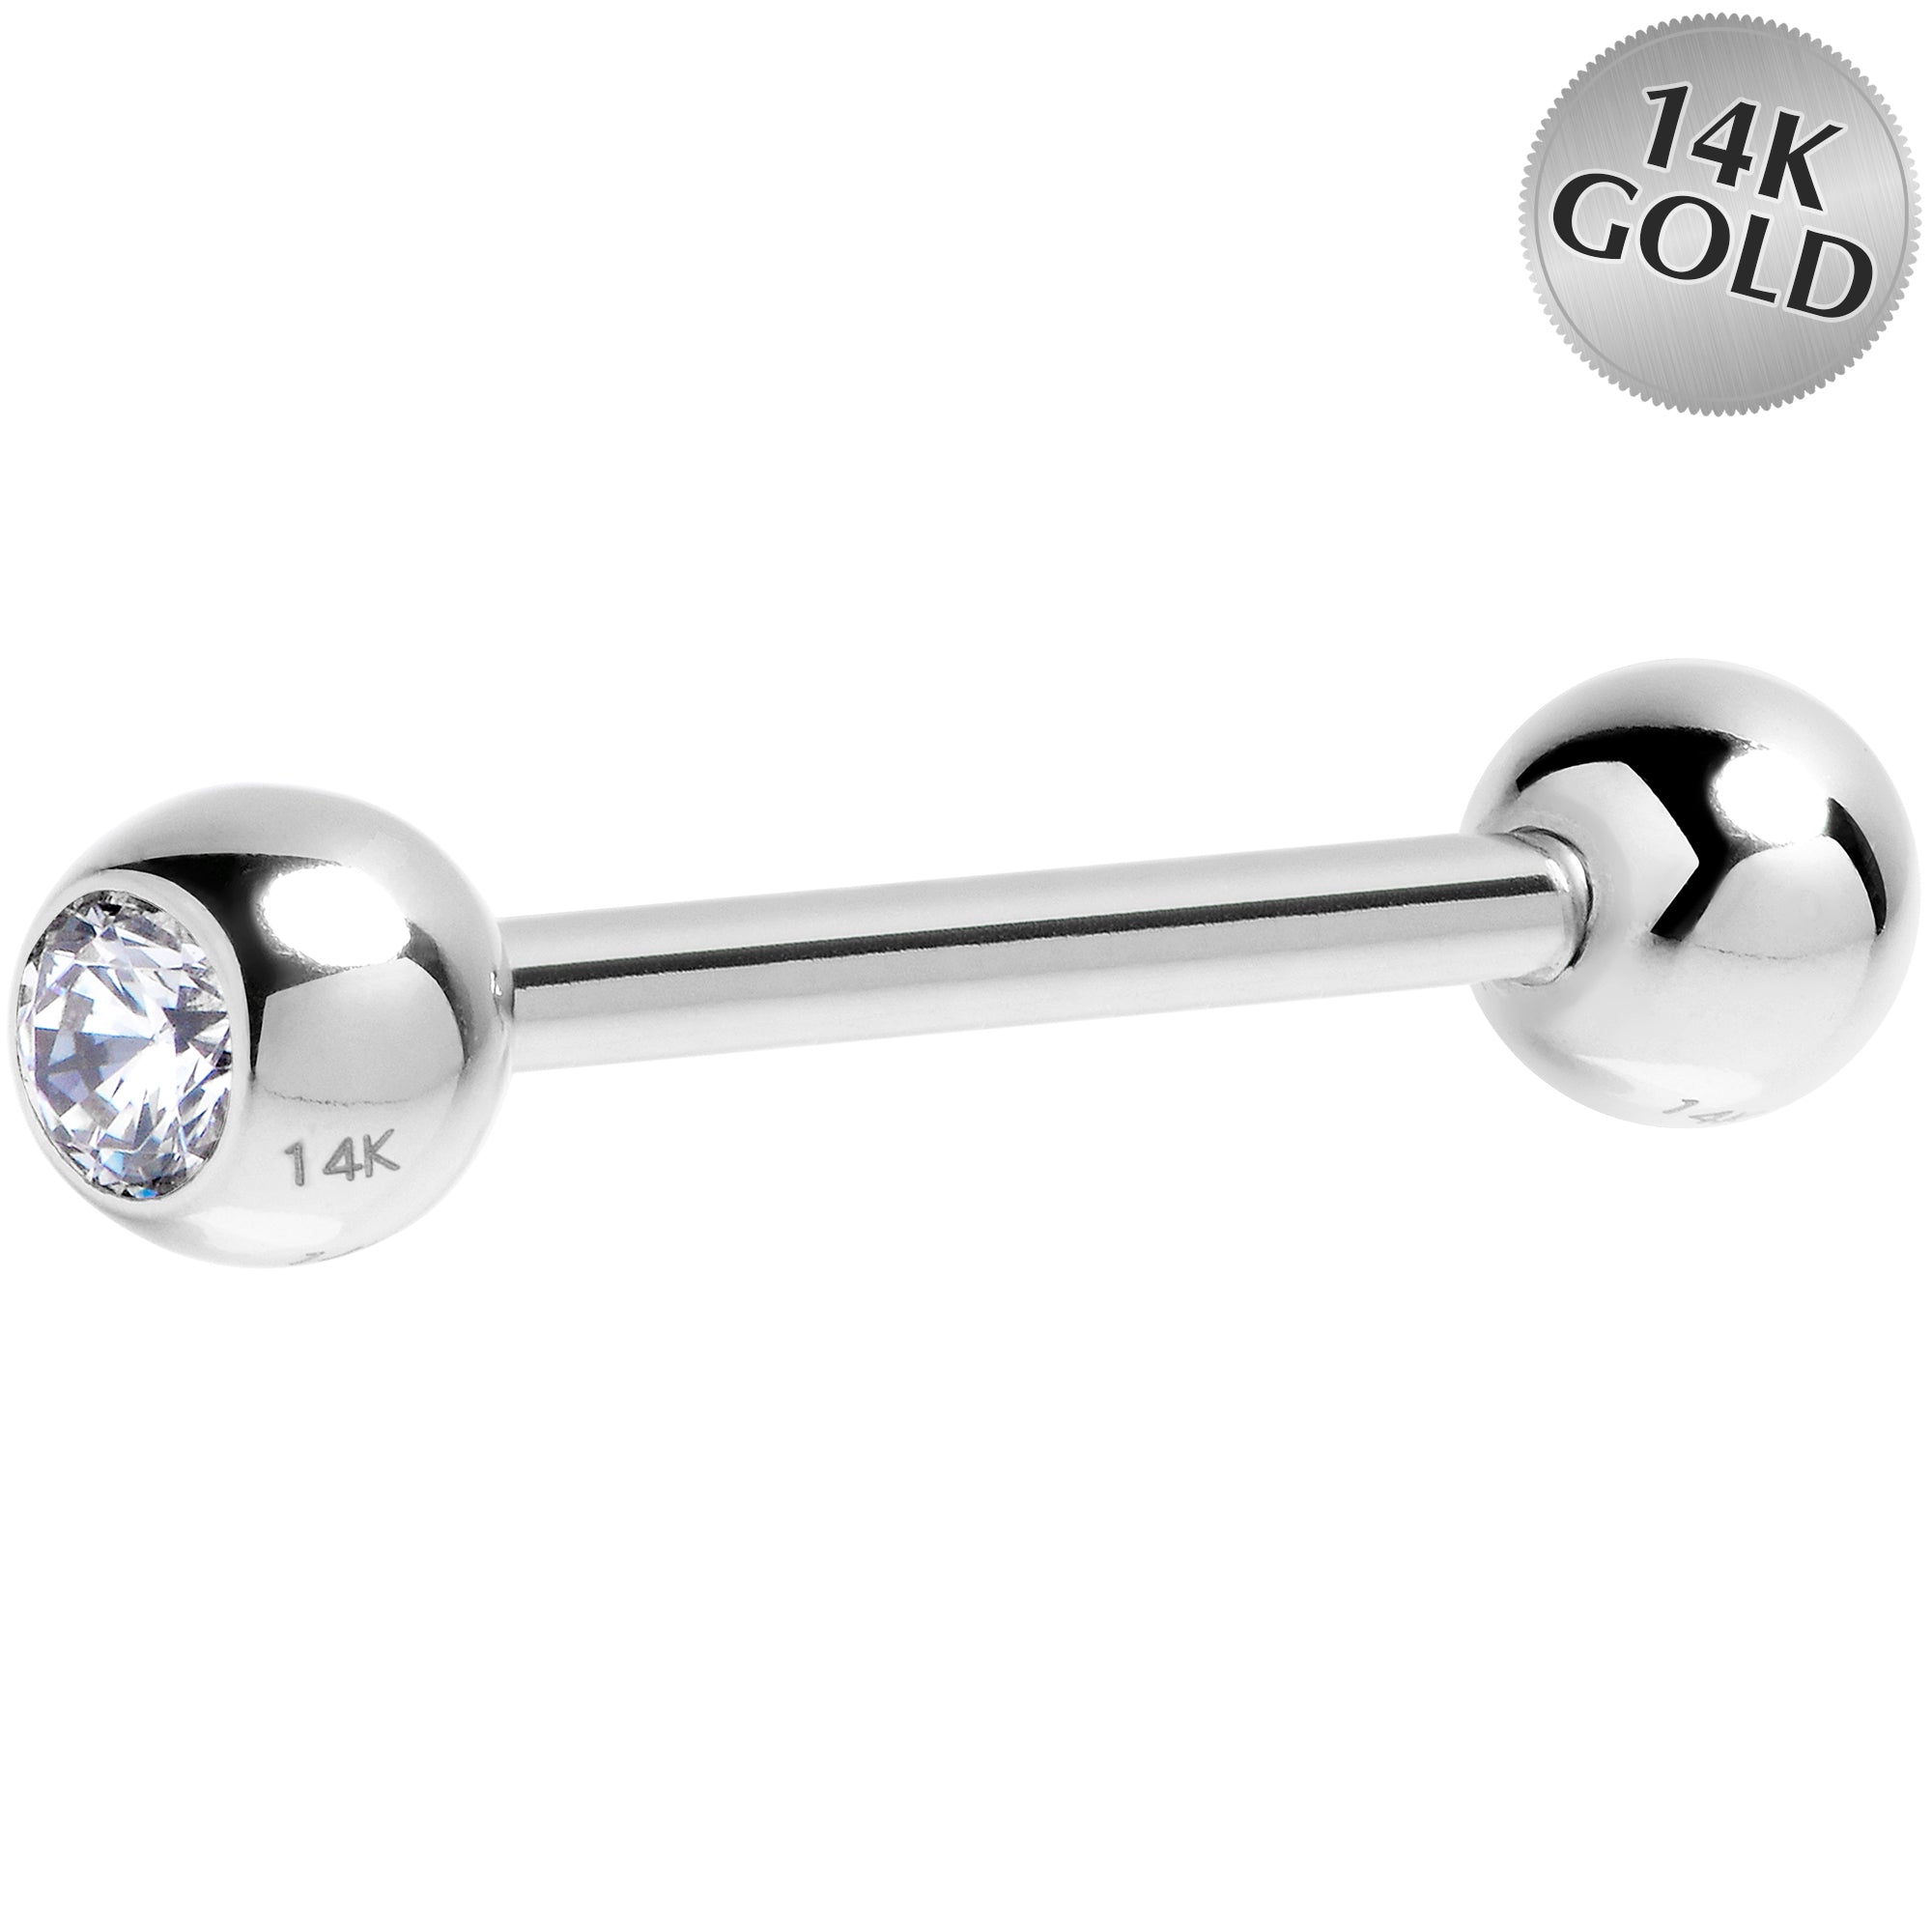 14 Gauge 5/8 Cubic Zirconia Solid 14k White Gold Straight Barbell